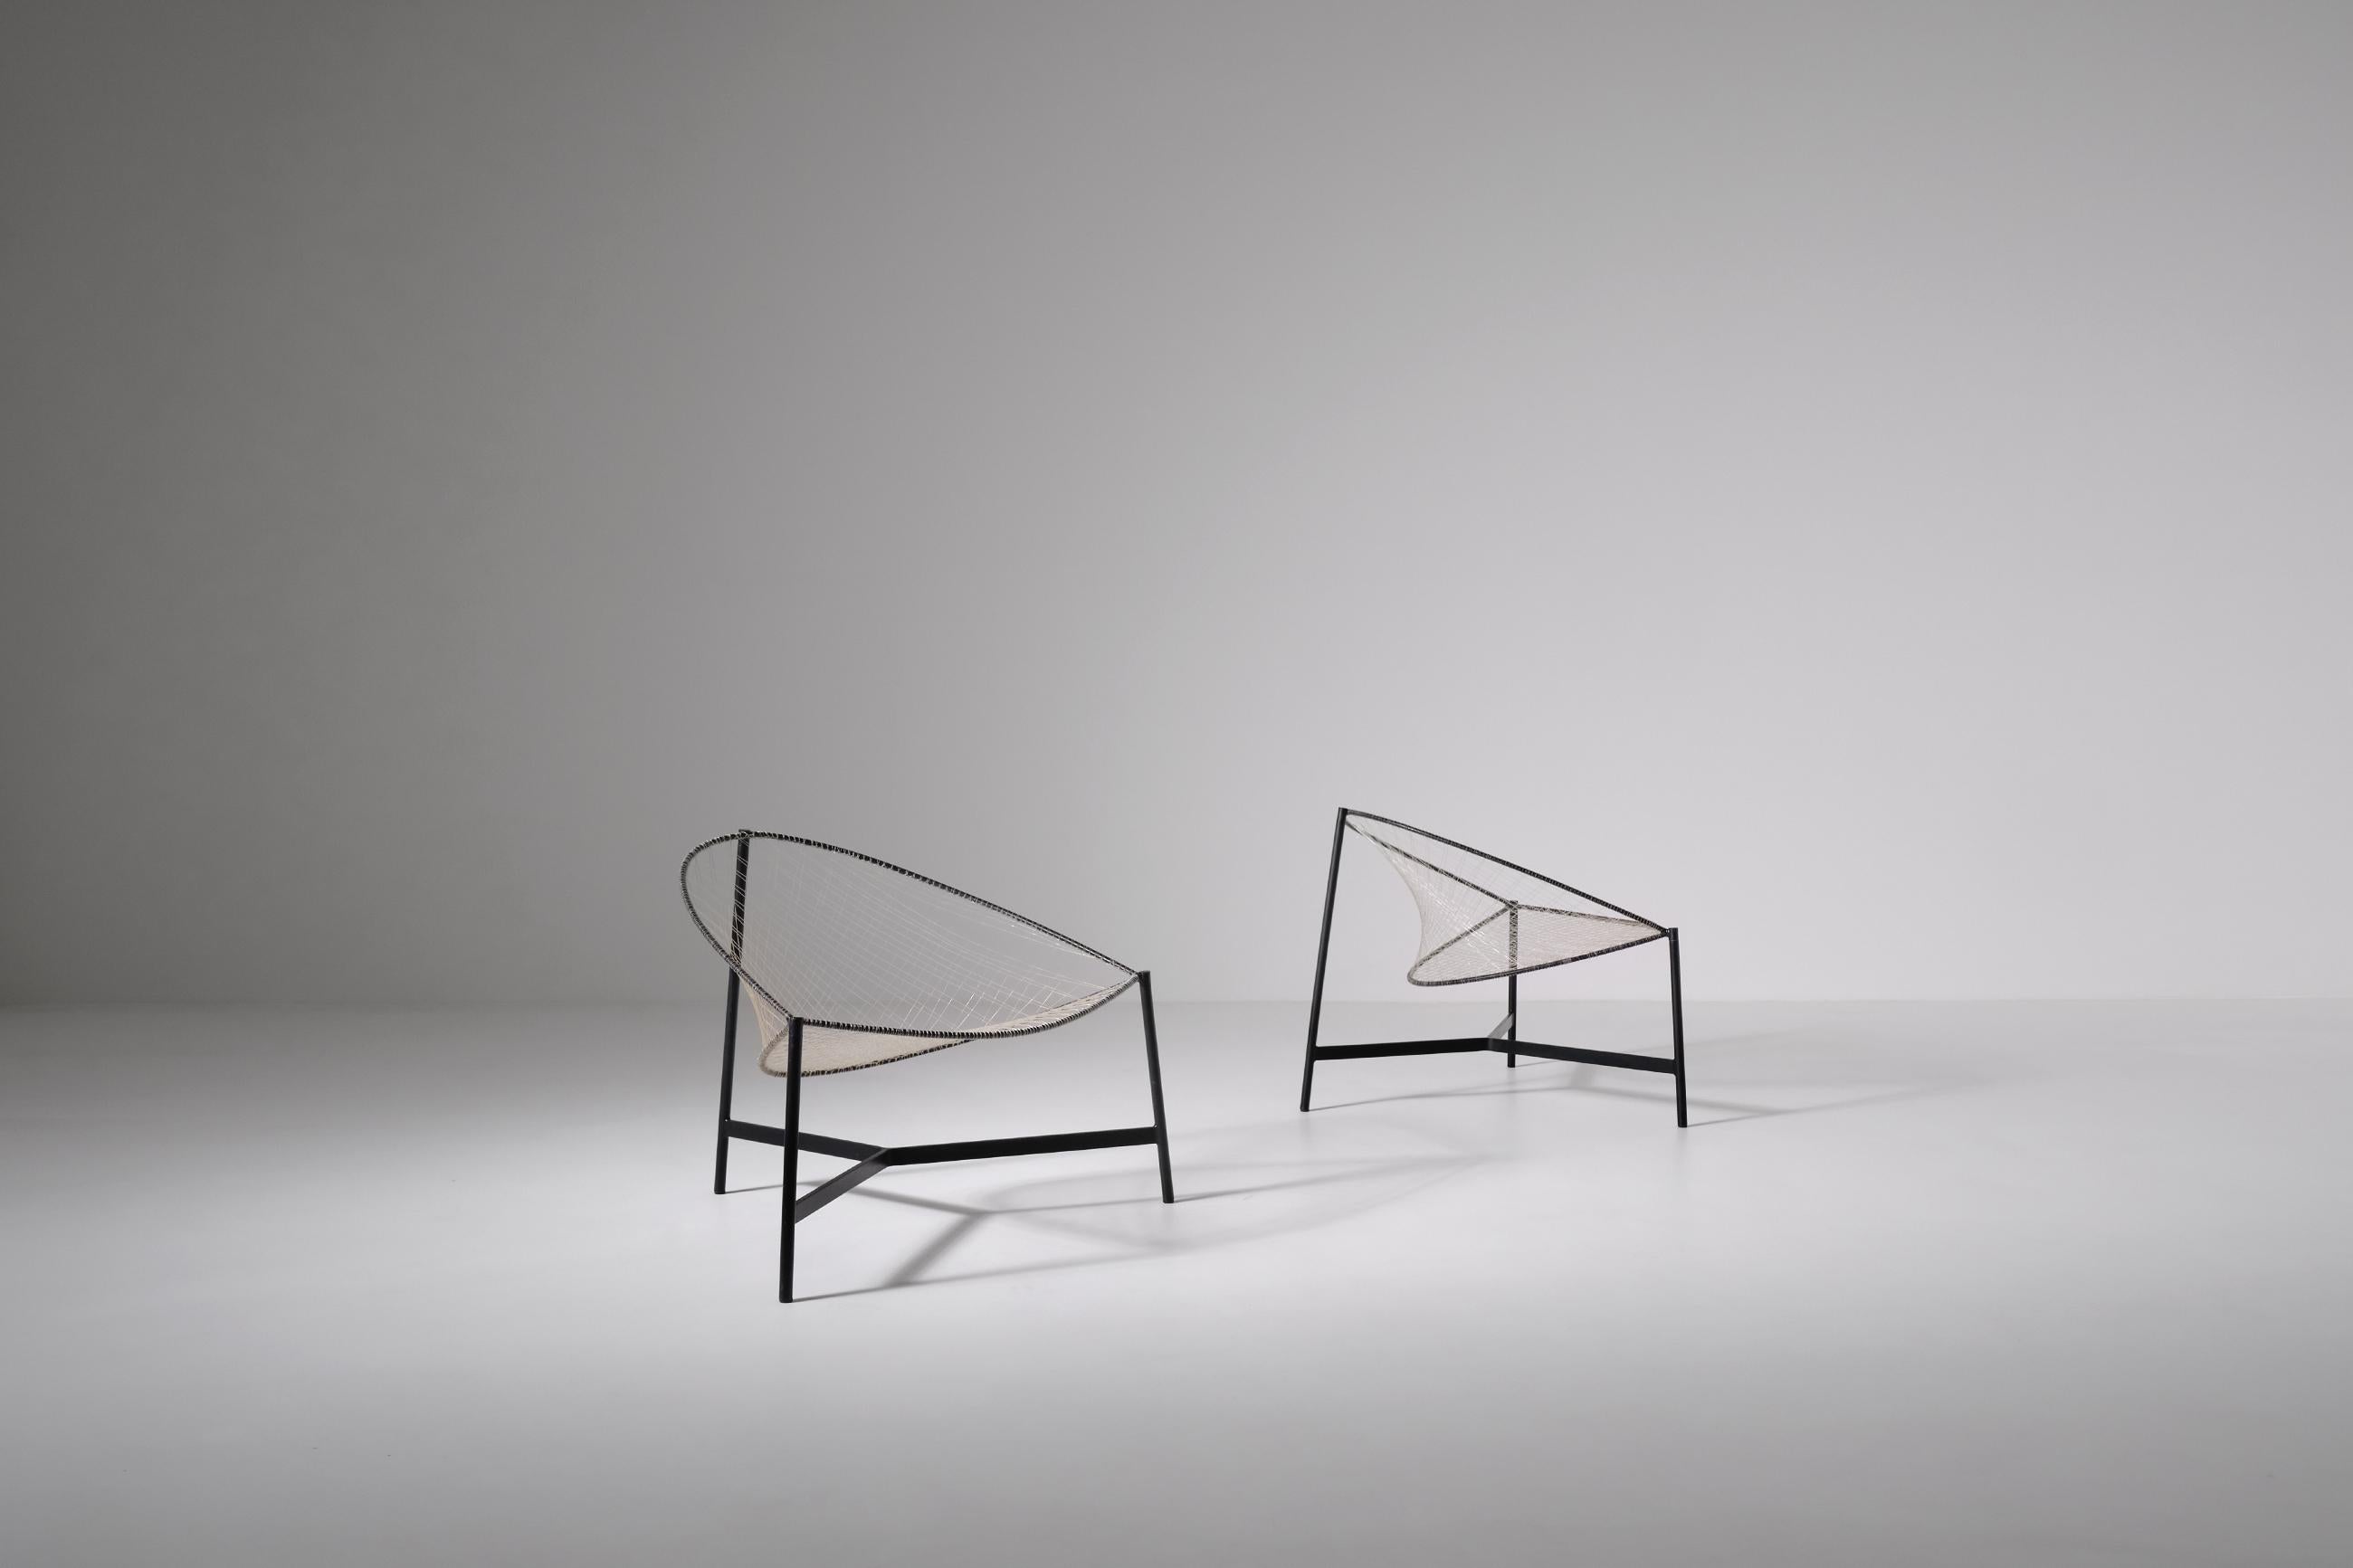 Rare pair of 'Cesto' chairs by Luciano Grassi, Sergio Conti and Marisa Forlani by Emilio Paoli, Italy ca. 1959. The chairs are from the 'Monofilo' series. The design is the result of experimenting with new materials and the simplification and